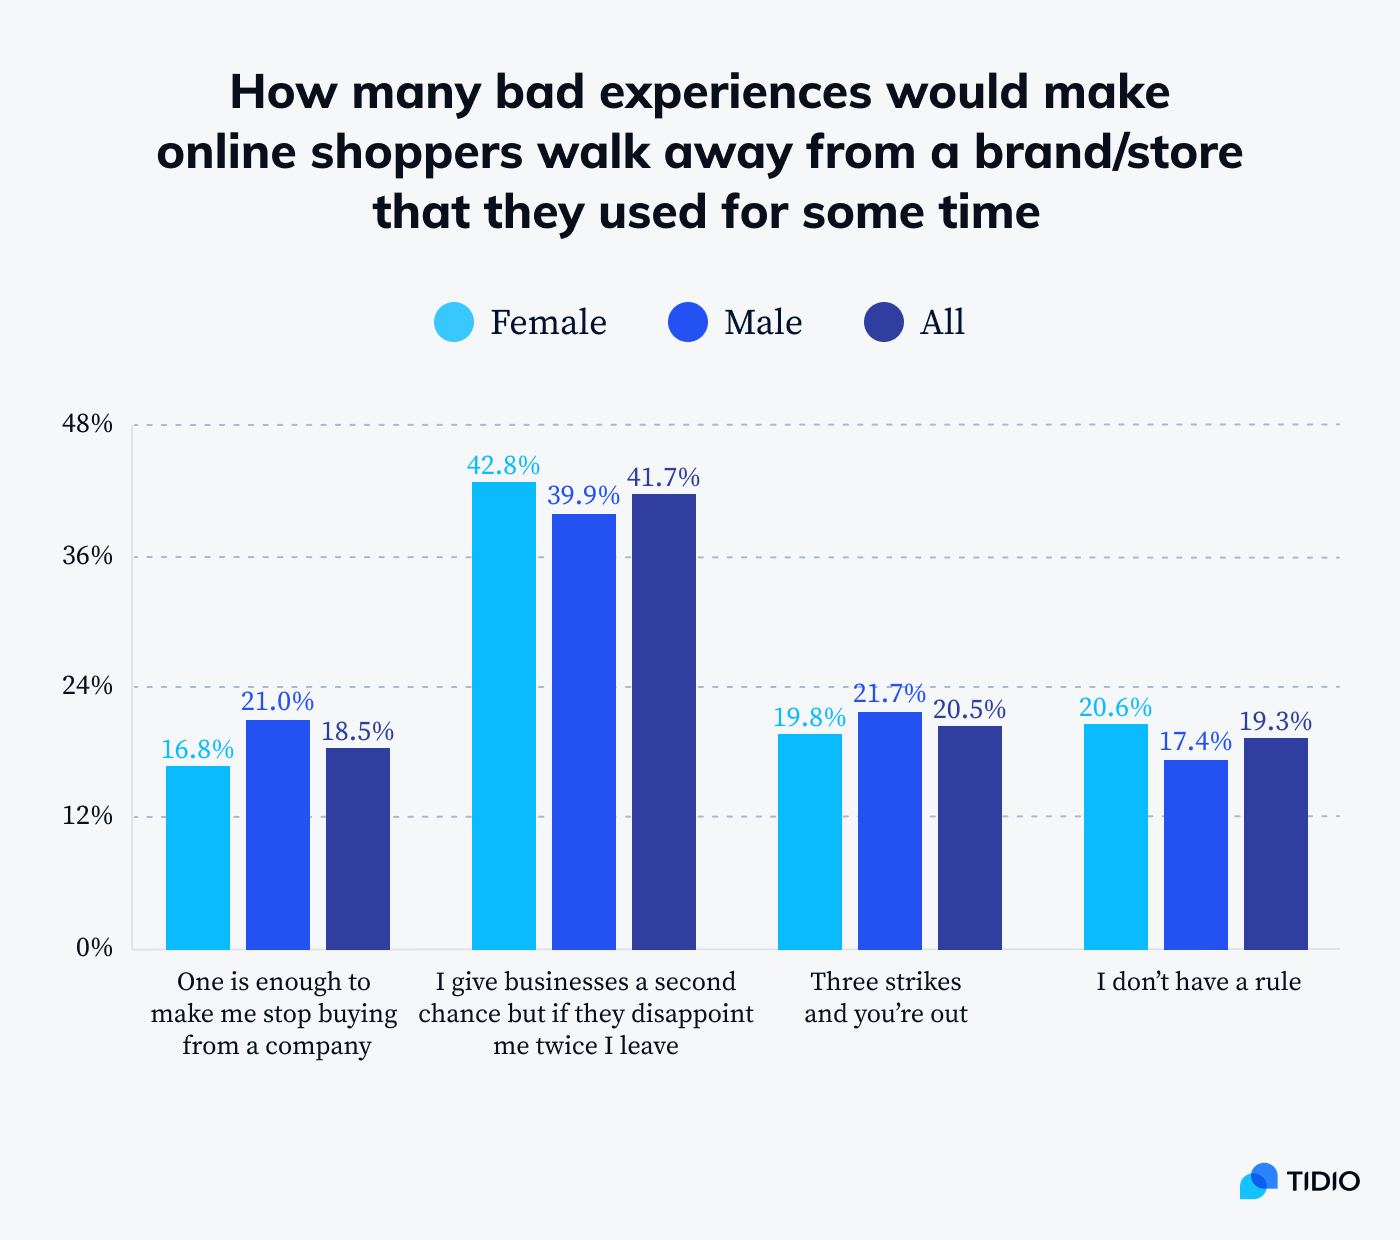 How many bad experiences would make online shoppers walk away from a brand/store that they used for some time